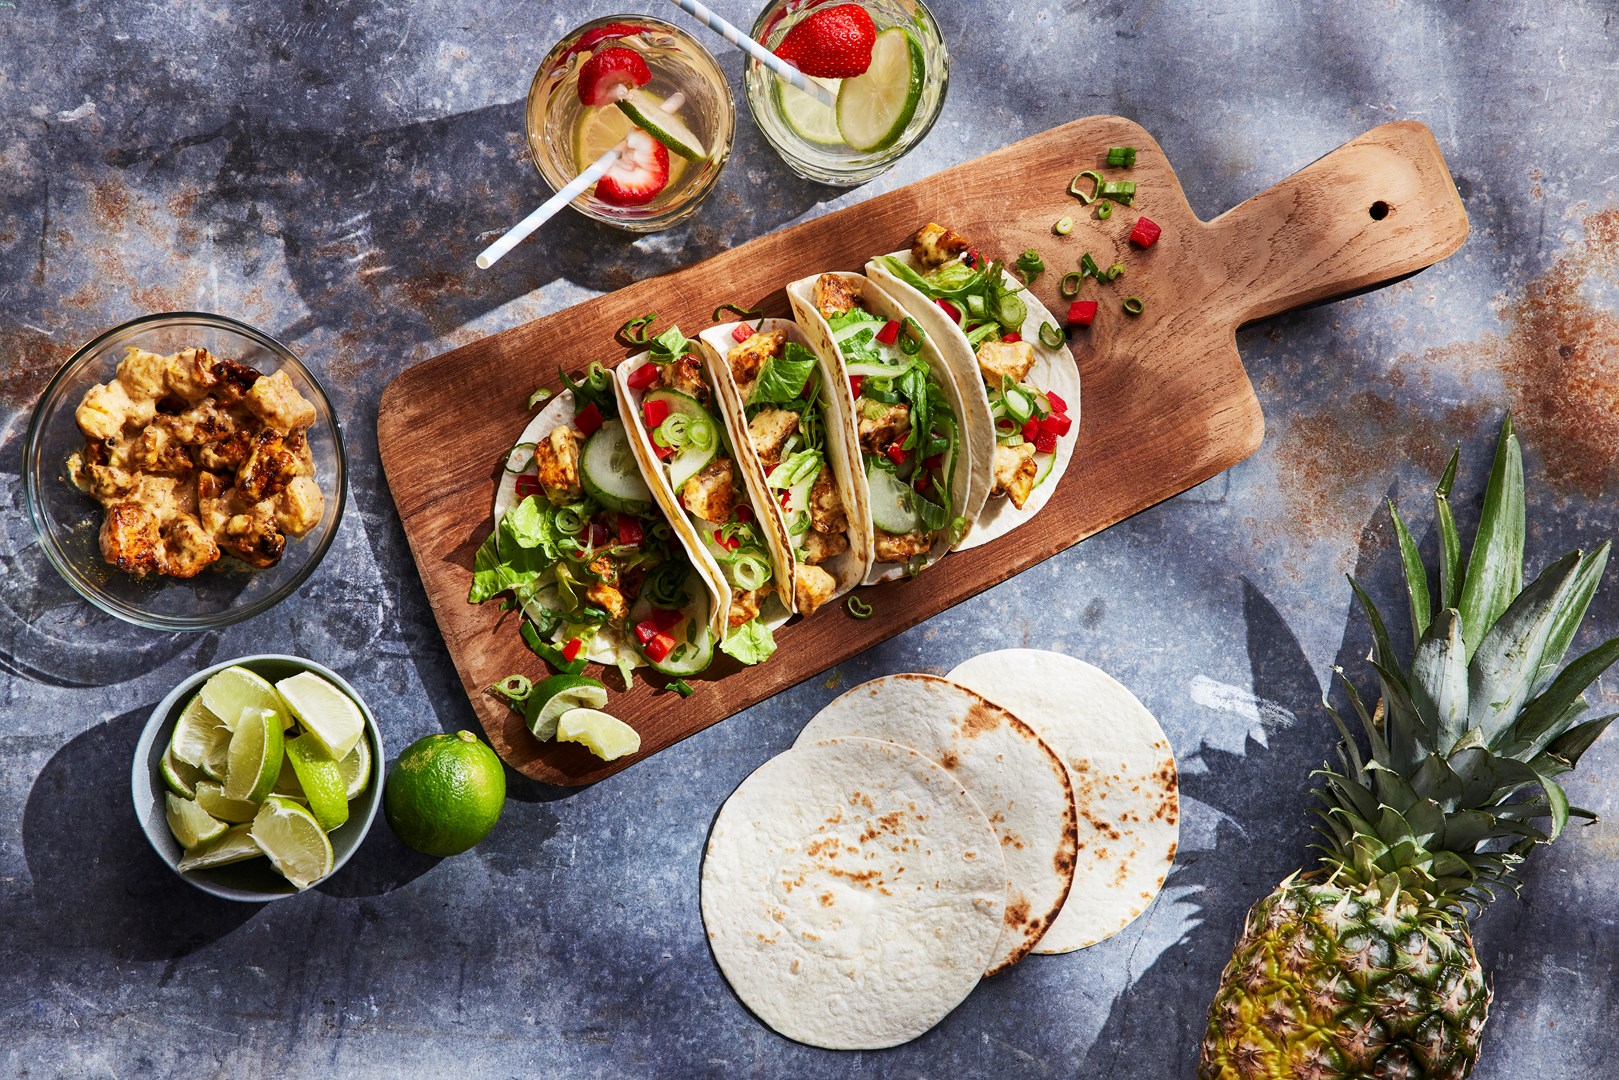 Picnic tacos with chicken and mango mix 